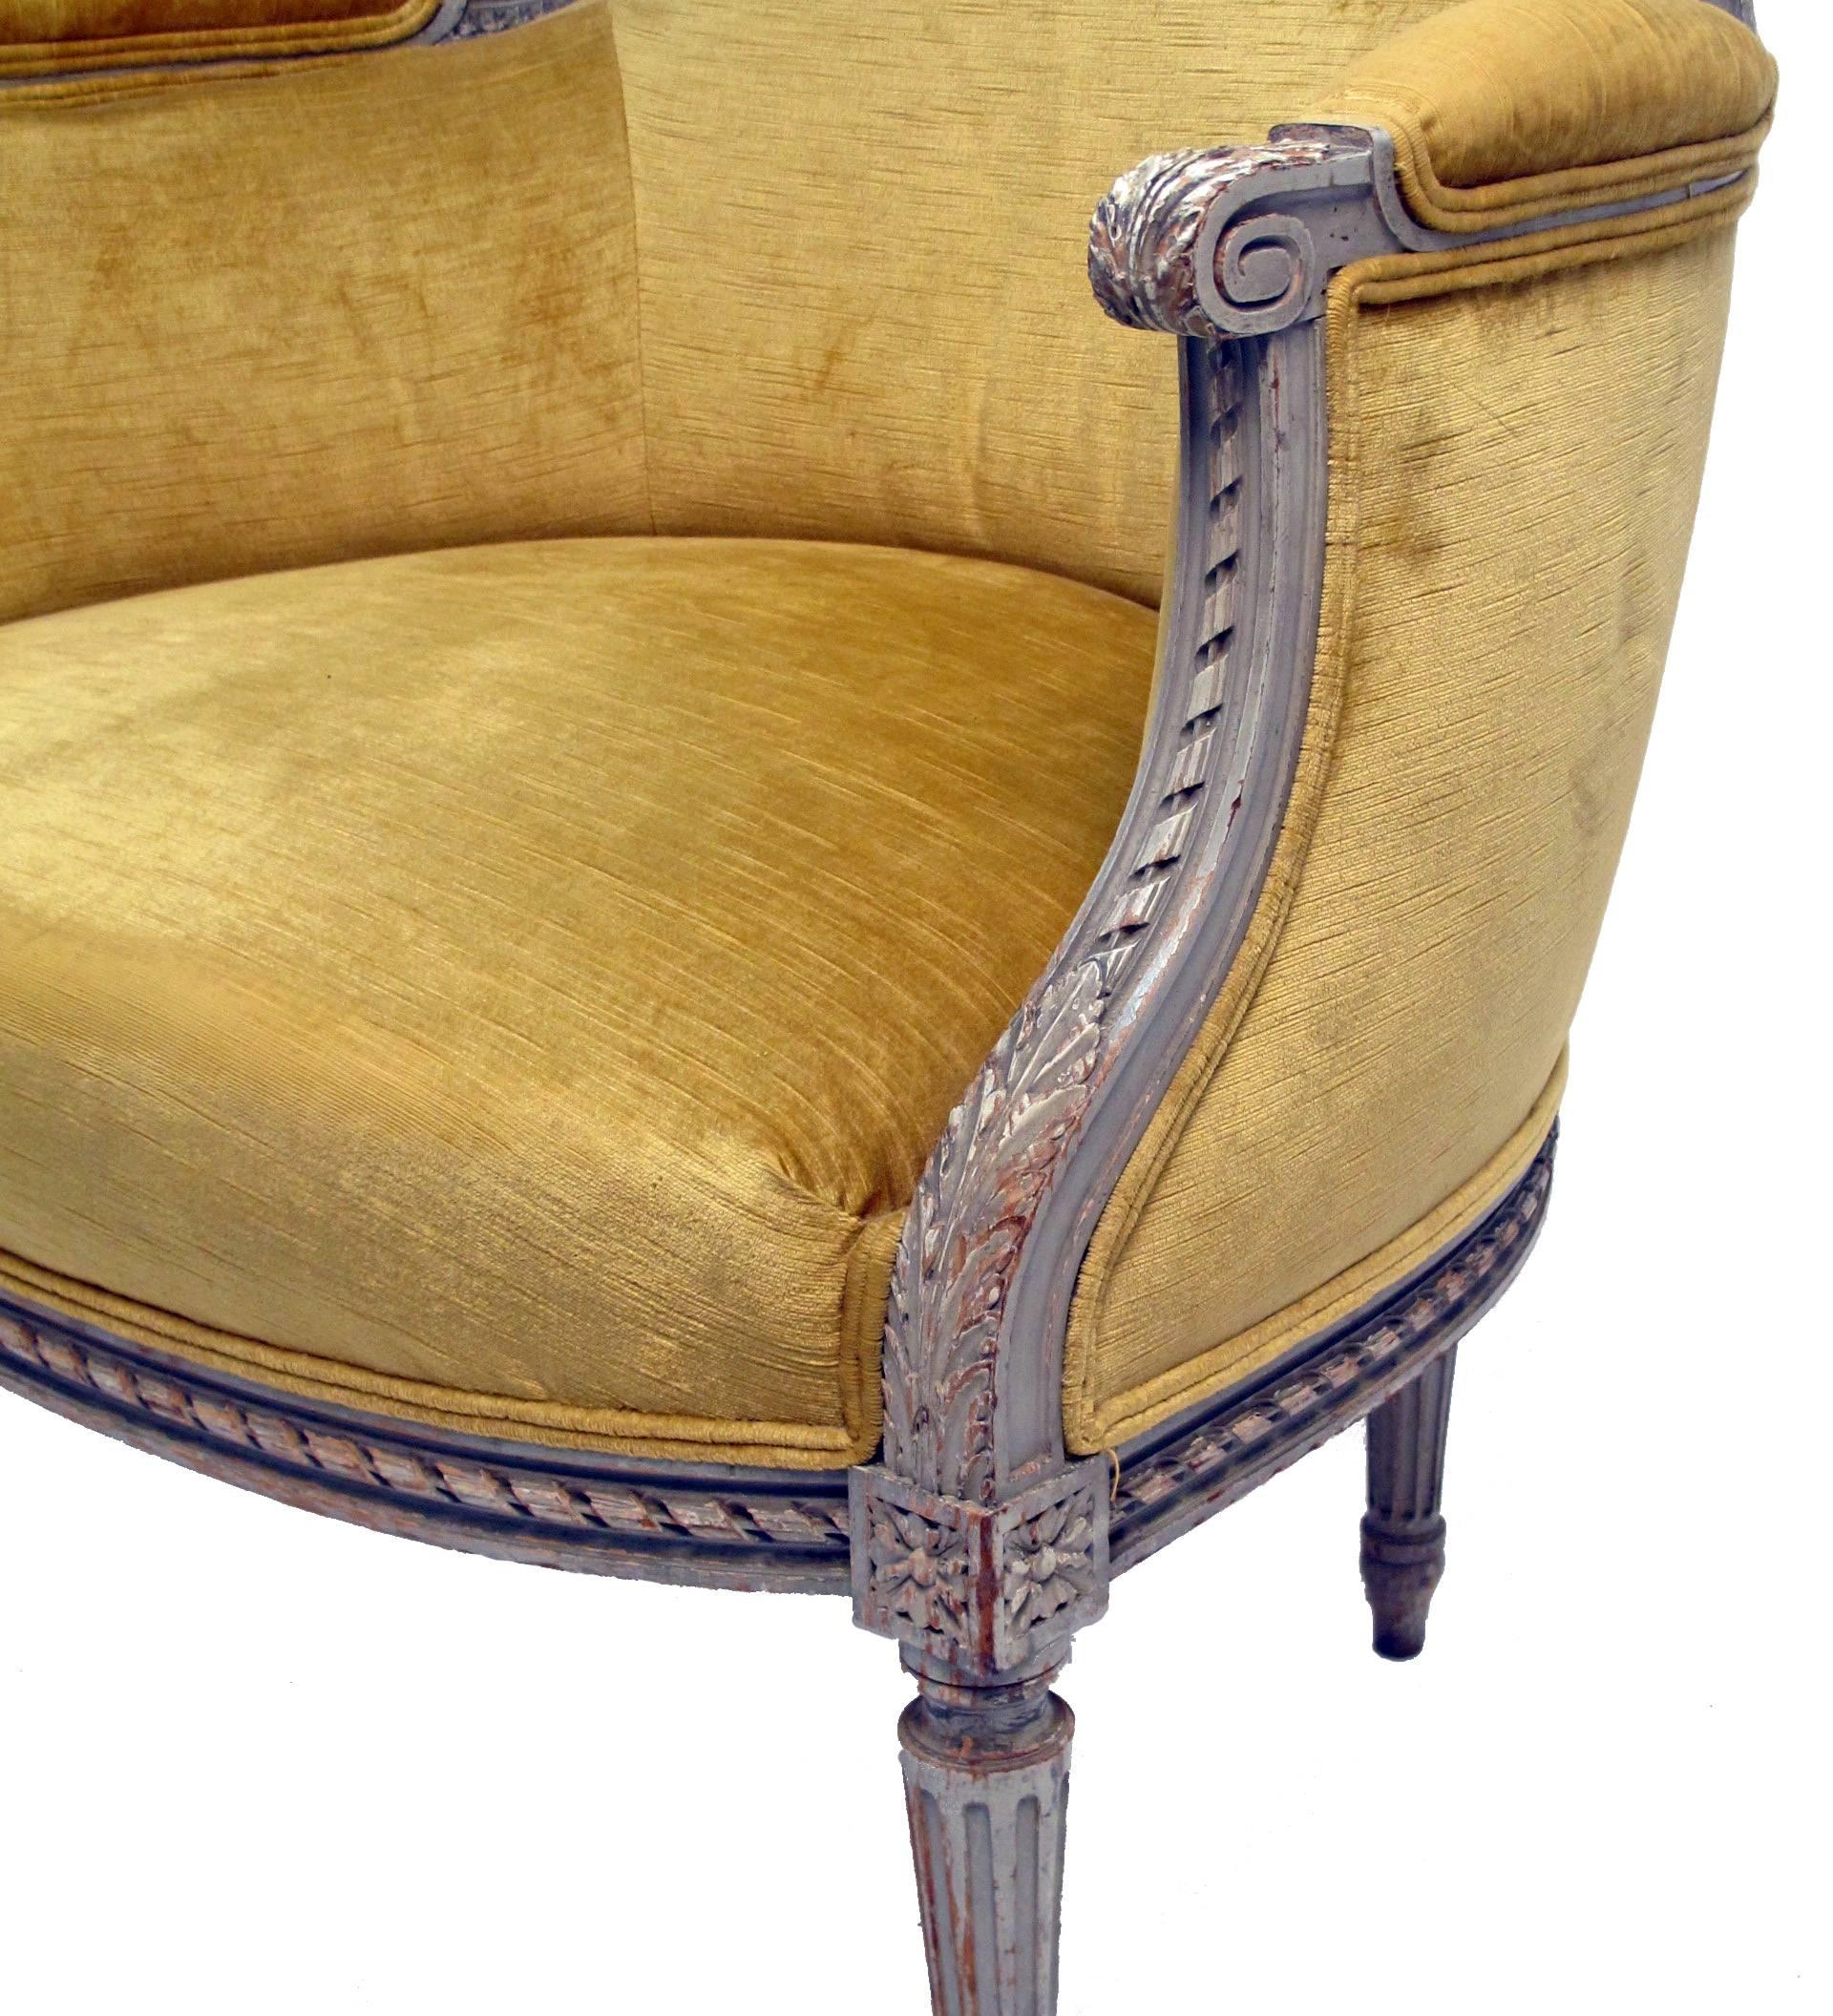 20th Century French Louis XVI Style Bergere Chair with Ottoman, circa 1920s